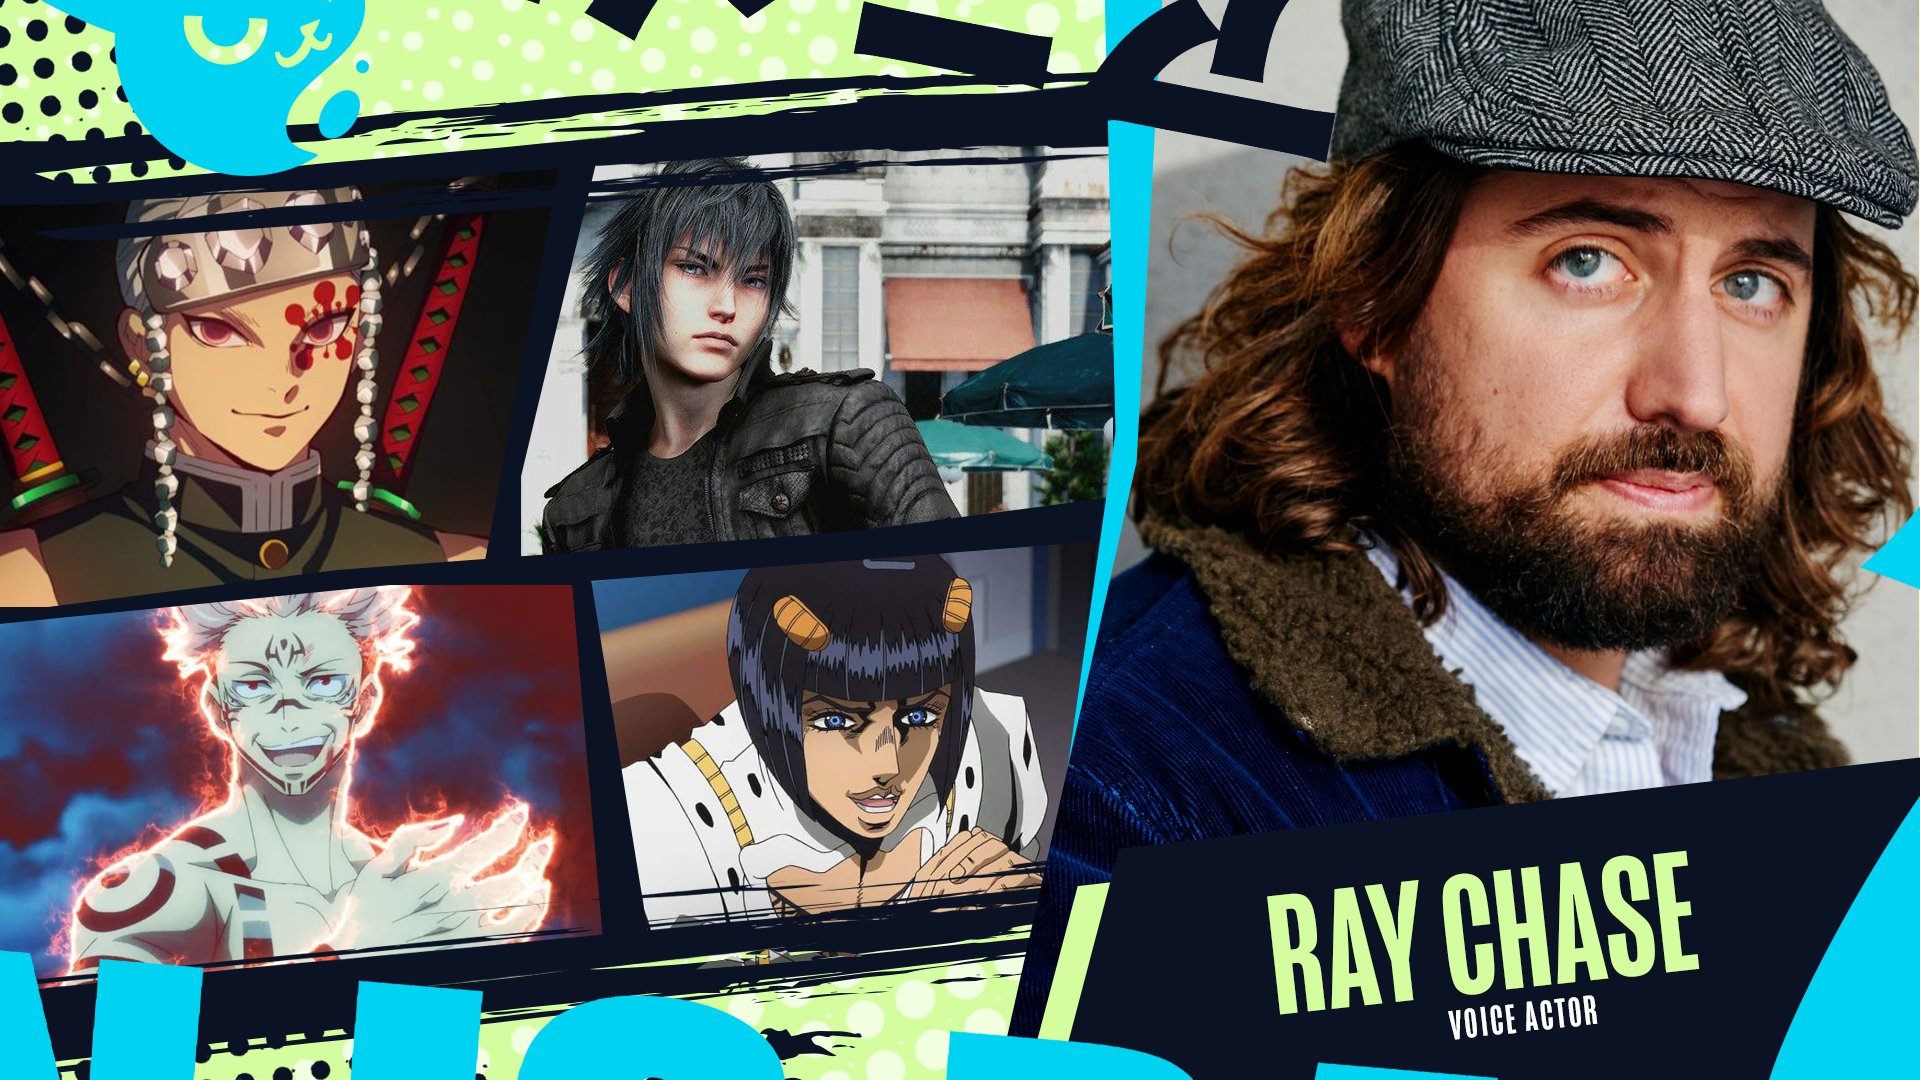 Voice Actors Ray Chase, Robbie Daymond, and Max Mittelman are Bringing the  L.A.V.A. Show to AX 2019! - Anime Expo